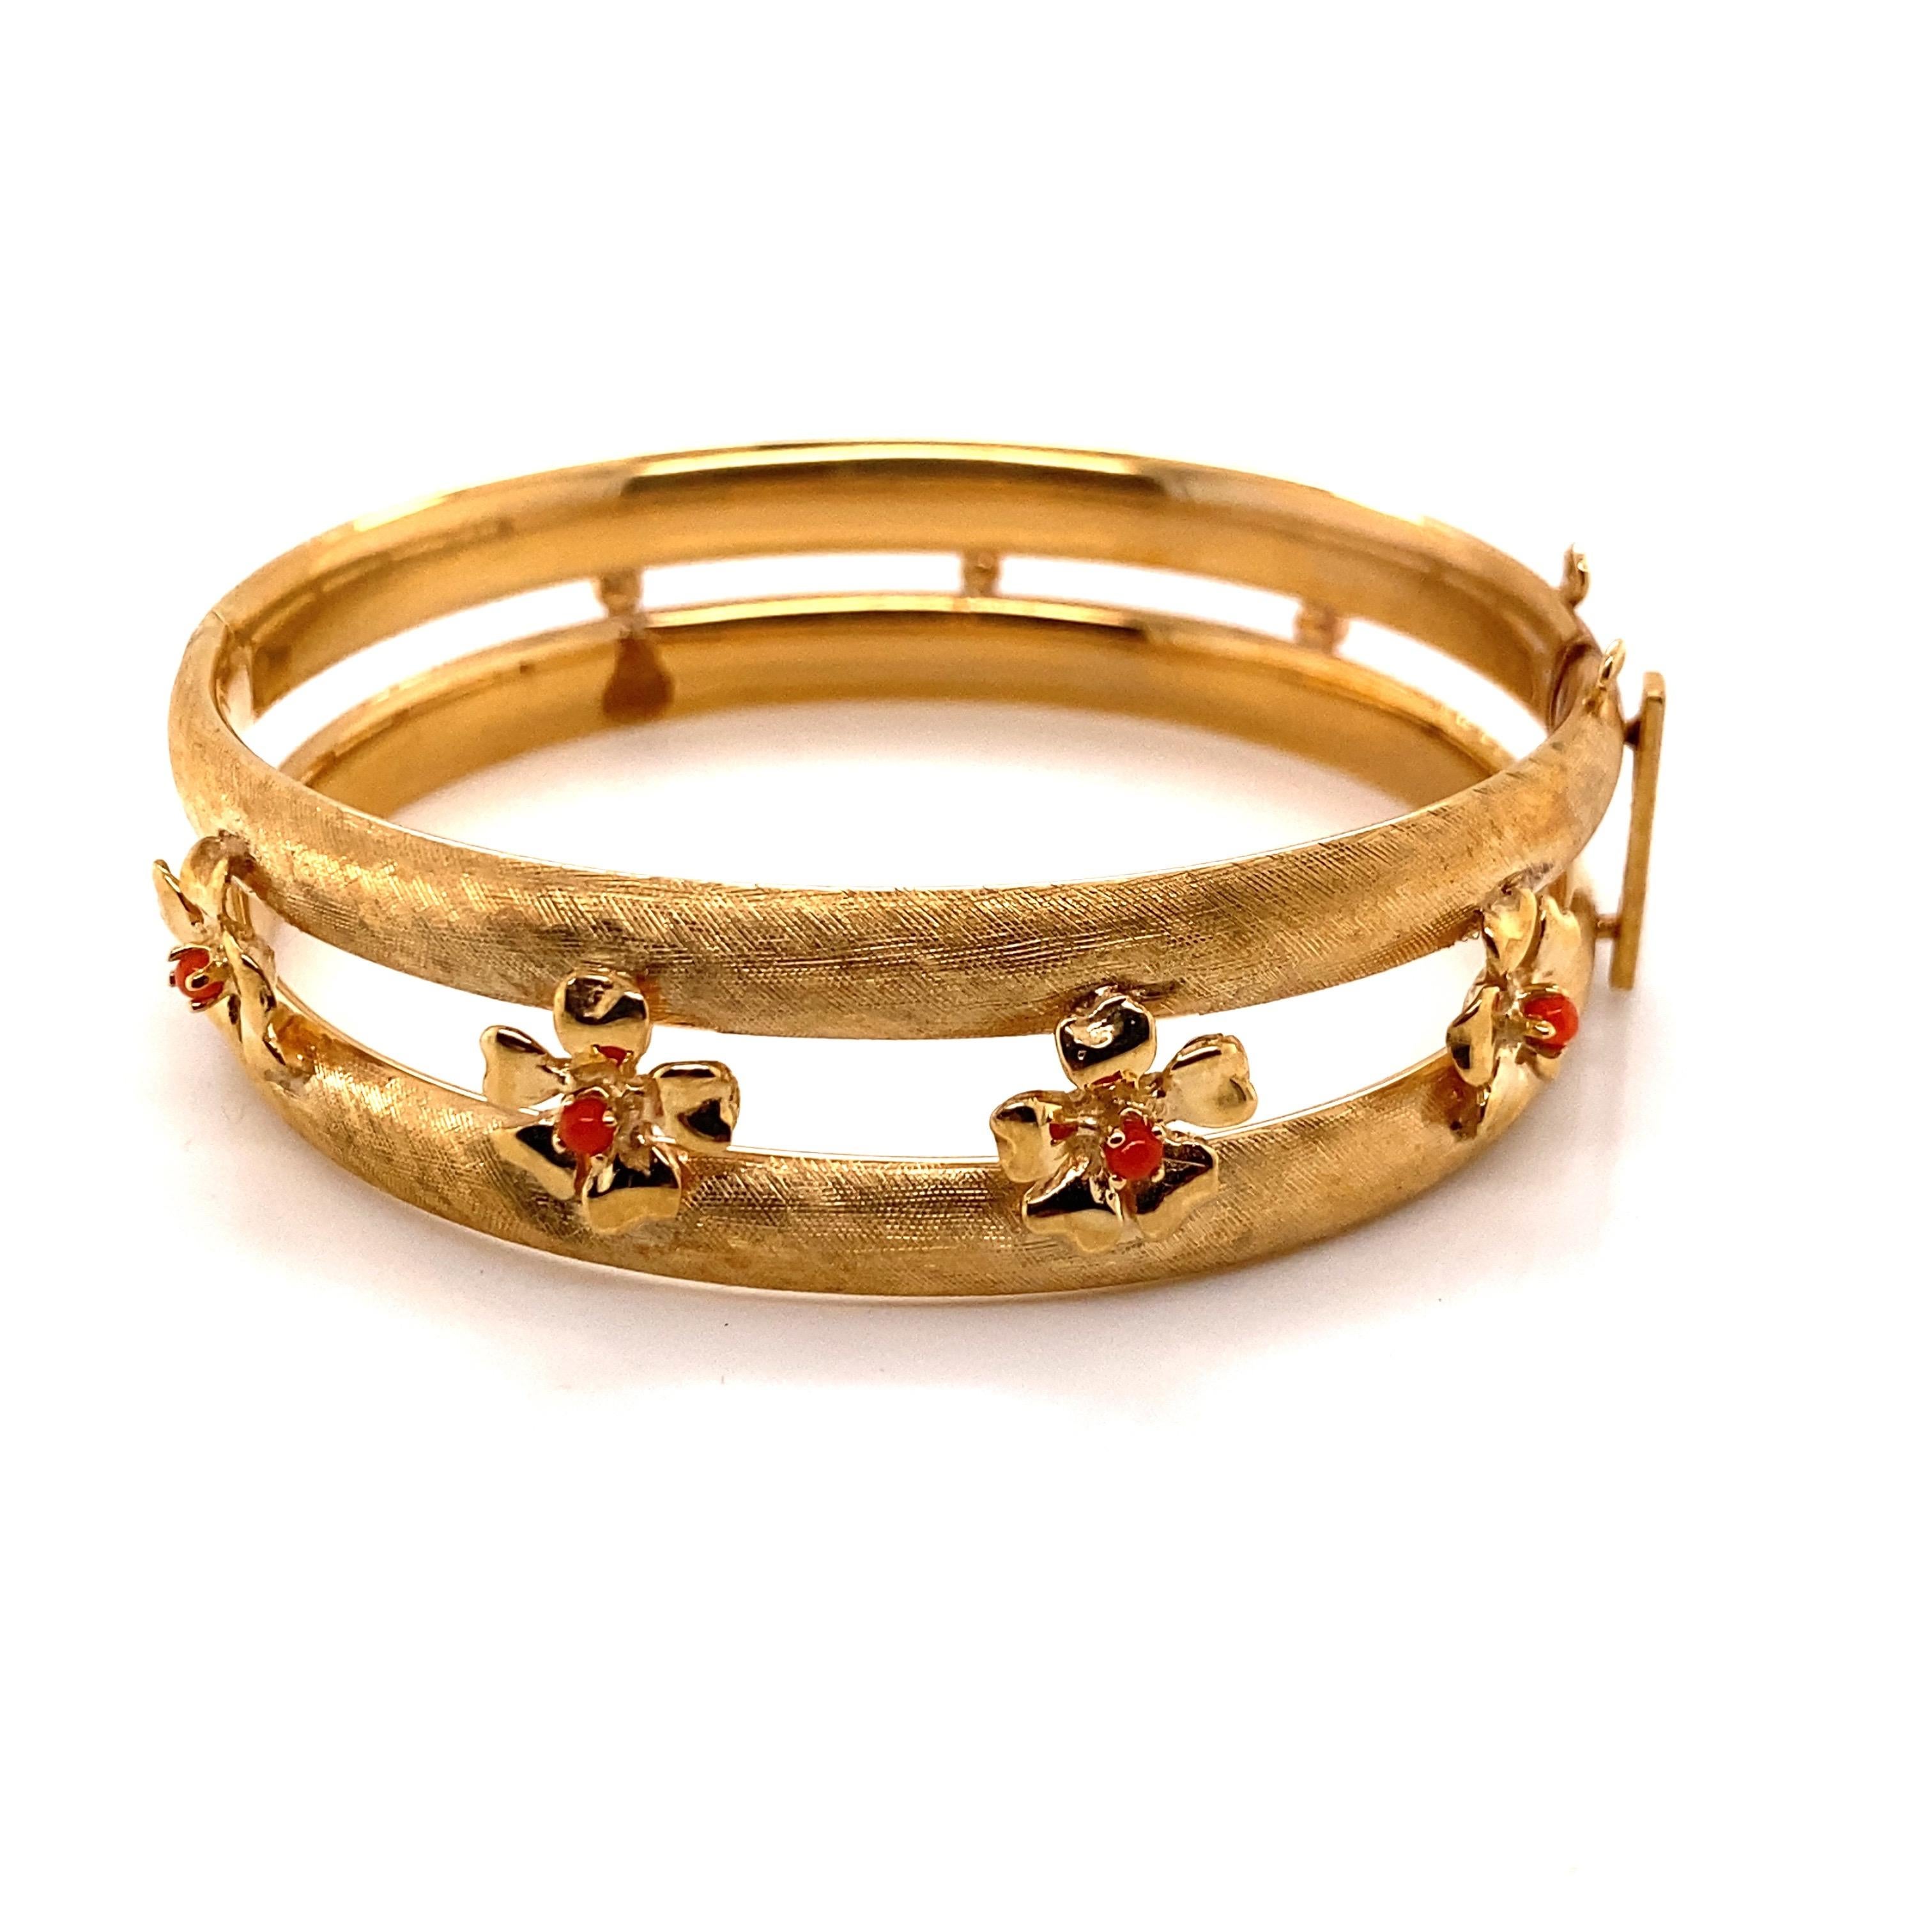 Vintage 14K Yellow Gold Bangle Bracelet with Coral Flower Designs - The bangle measures 17.3mm wide on the top and 14.6mm on the bottom. The inside diameter is 2 inches high and 2.2 inches wide. The bracelets weigh is 18.65 grams.